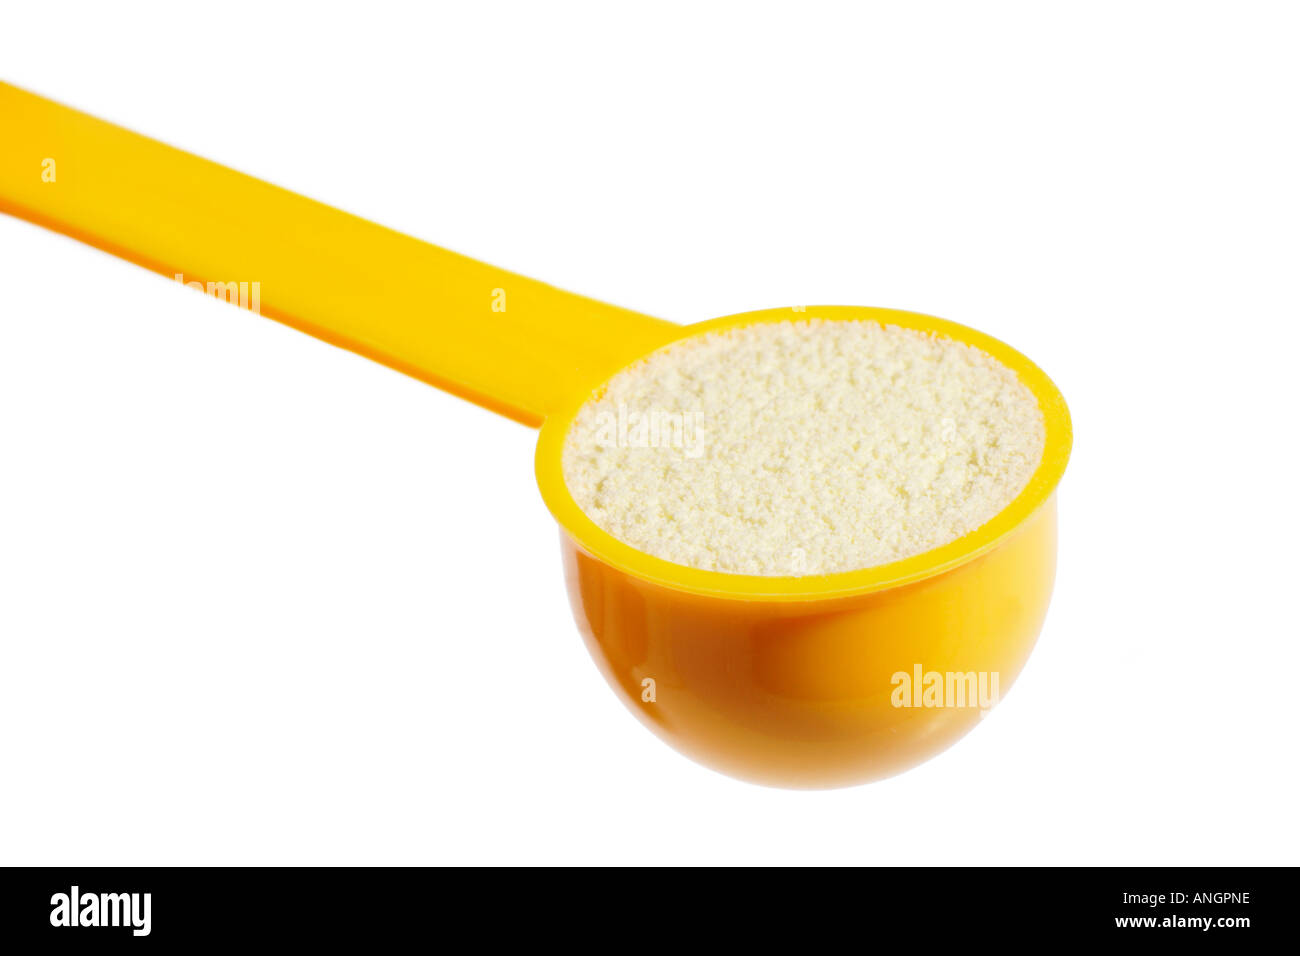 baby milk formula powder in mearuring scoop on white background ANGPNE